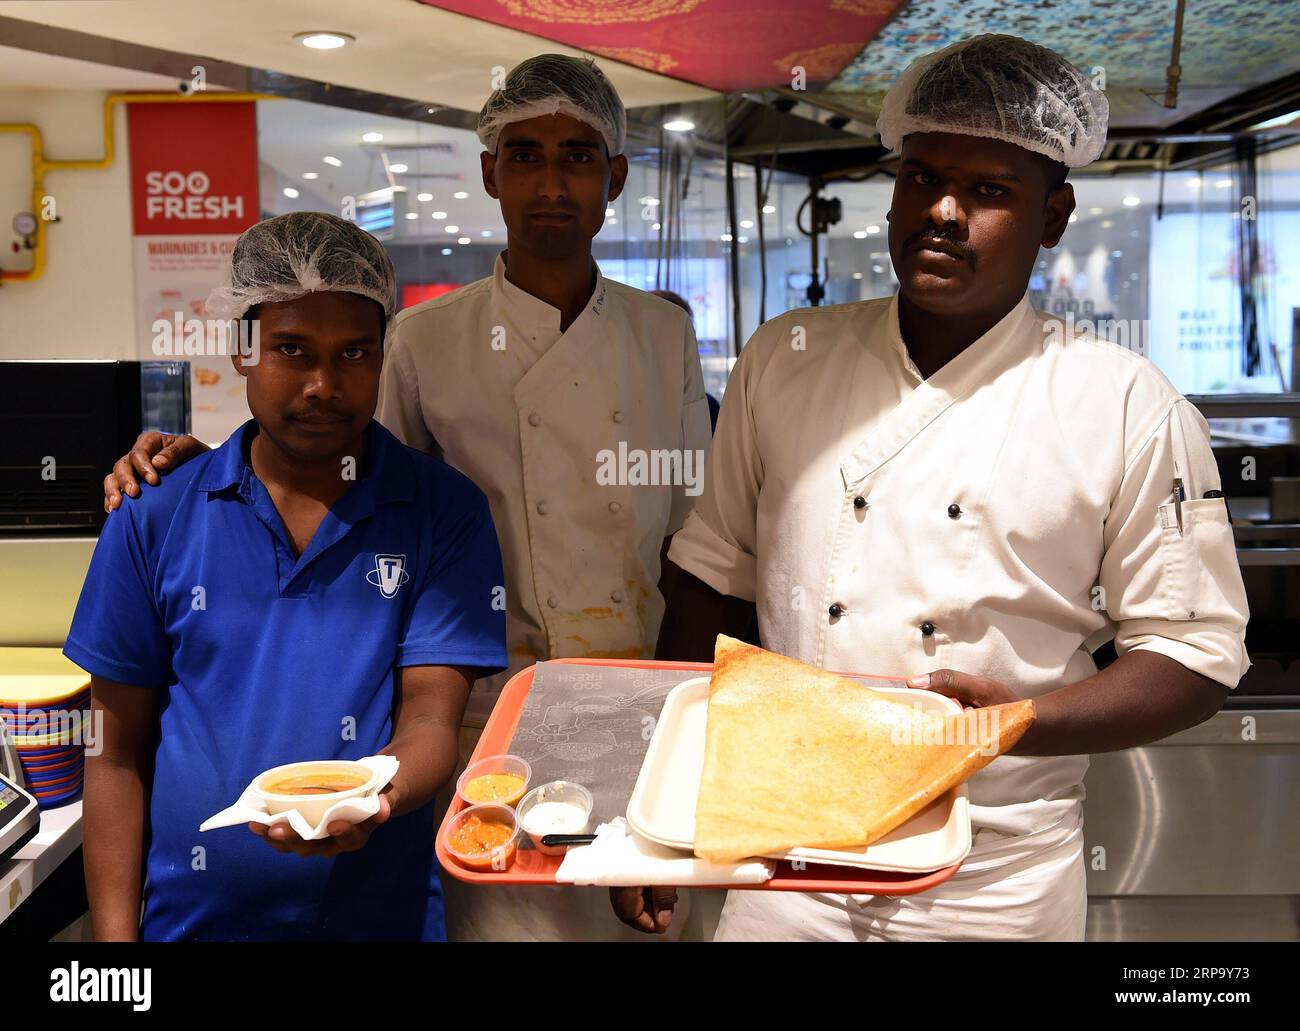 (190419) -- NEW DELHI, April 19, 2019 (Xinhua) -- An Indian chef shows Dosa he made at a supermarket in New Delhi, India, April 18, 2019. Dosa, a crispy paper-thin wrap with a spicy potato filling, eaten dipped in a tangy soup and a special sauce or chutney, is popular in southern India. (Xinhua/Zhang Naijie) INDIA-NEW DELHI-DOSA PUBLICATIONxNOTxINxCHN Stock Photo